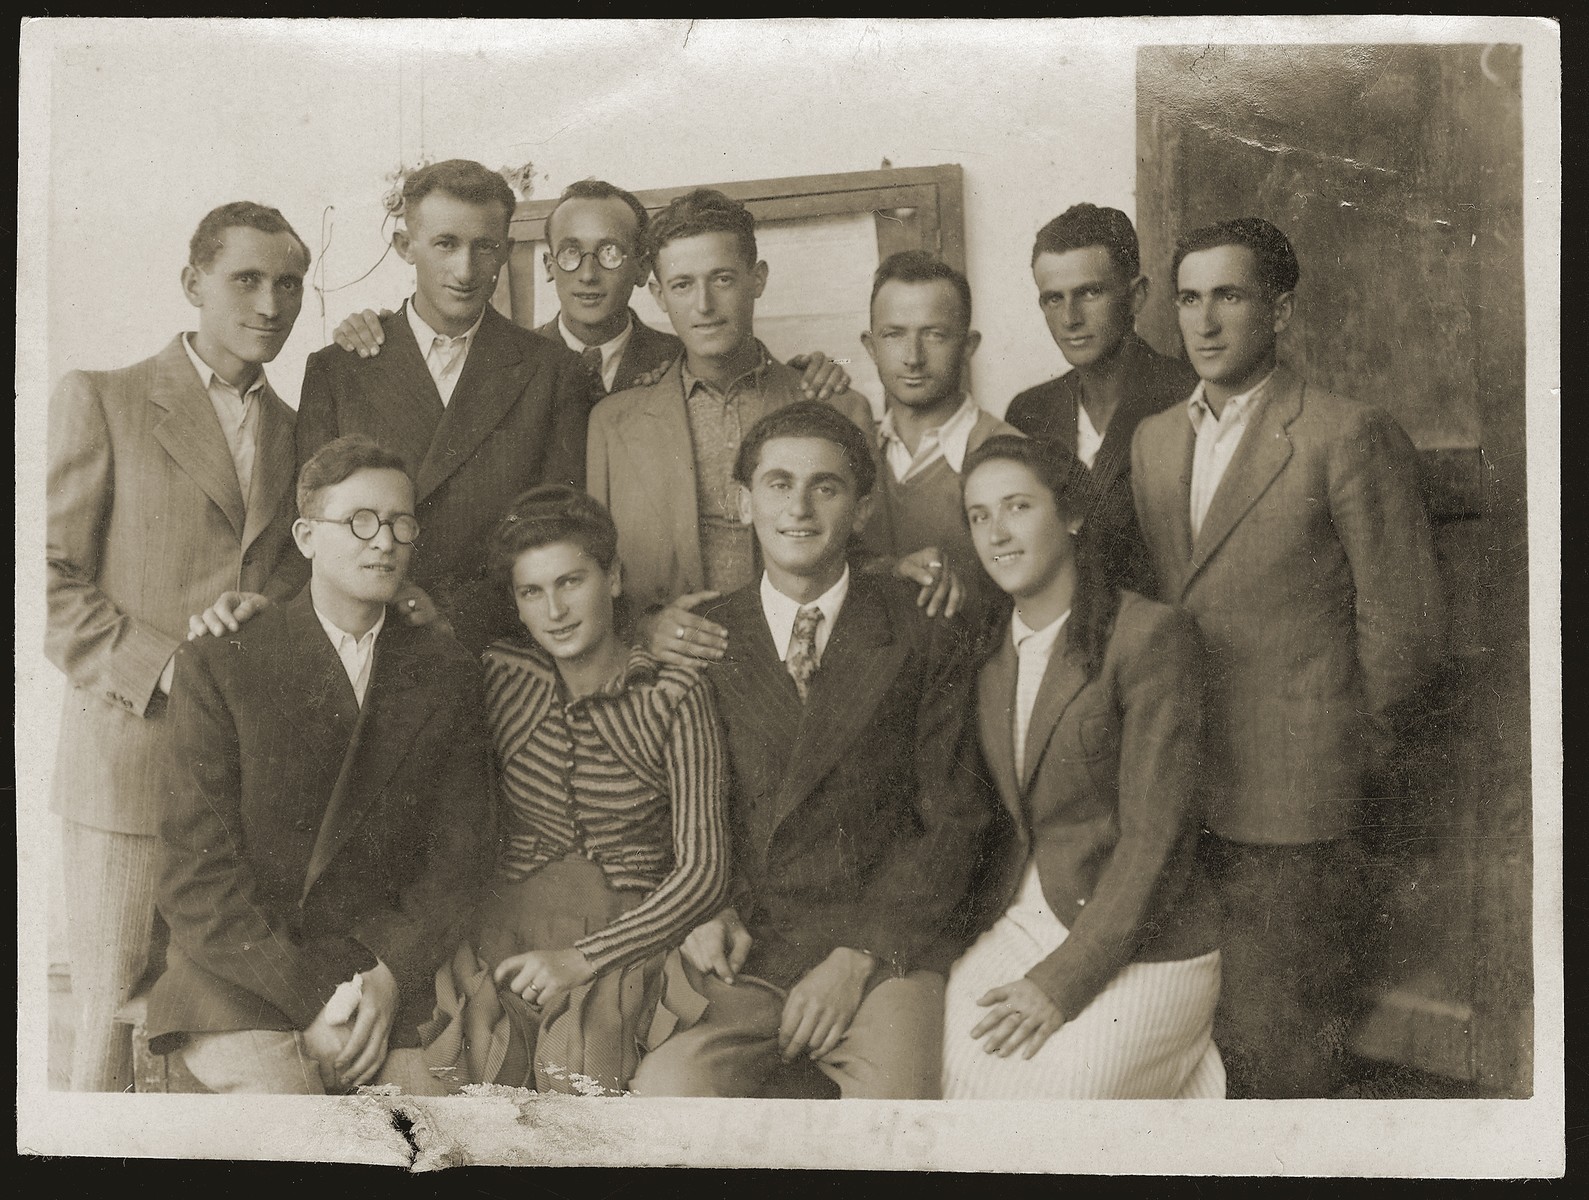 Group portrait of young Jewish men and women in Bukhara.

Salek Liwer is pictured seated second from the right.